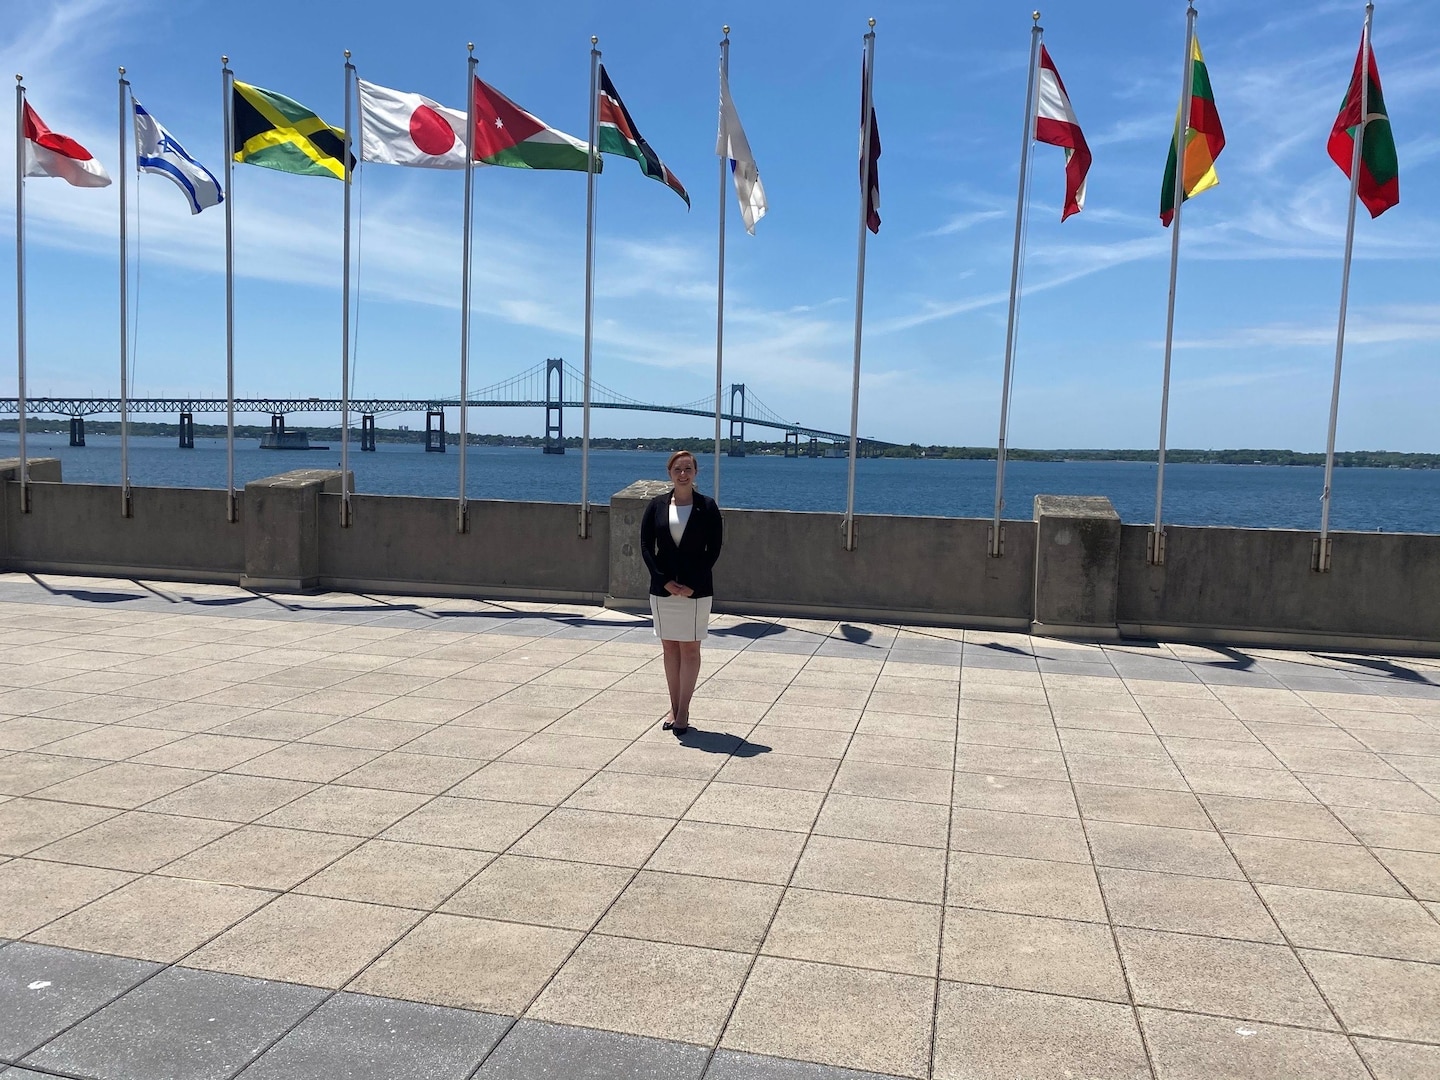 IMAGE: Emily Hester, lead systems engineer at Naval Surface Warfare Center Dahlgren Division, poses for a photo by the Naval War College flags. Hester and four other Naval Sea Systems Command civilians learned alongside active duty military personnel from all the branches during the ten month Bundy Scholars program.